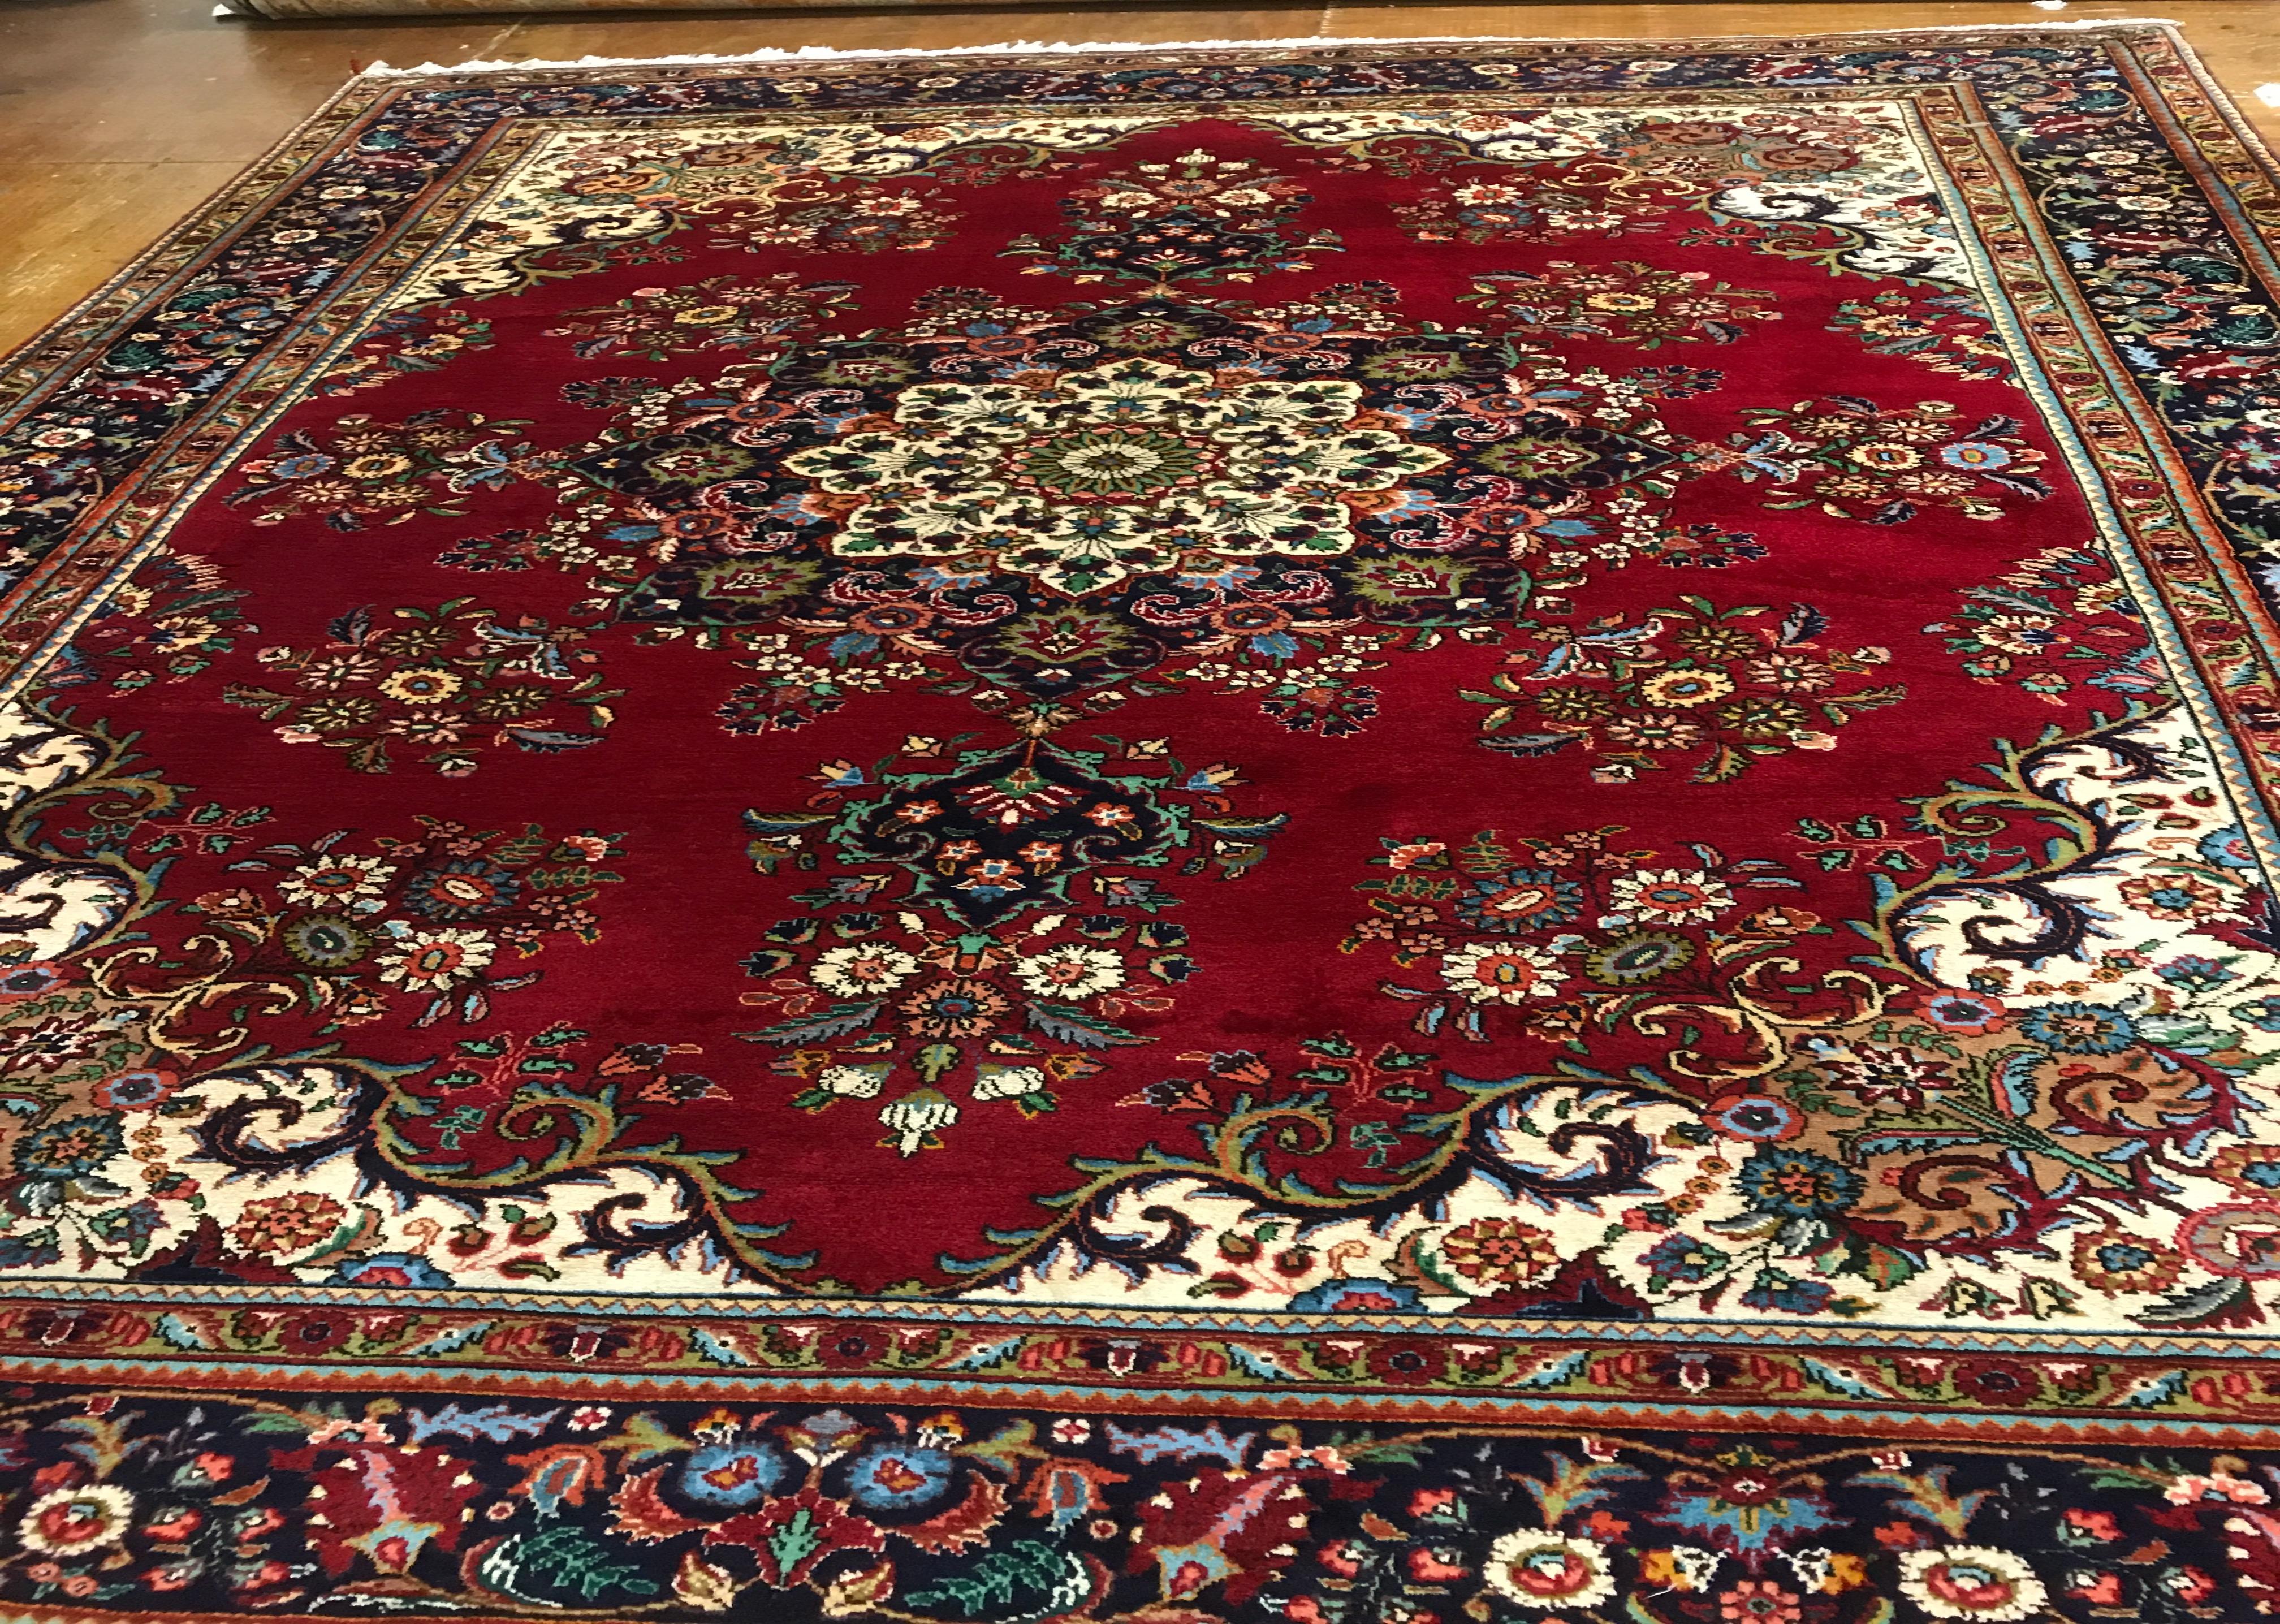 Rug Cleaning and Repair NY Photo